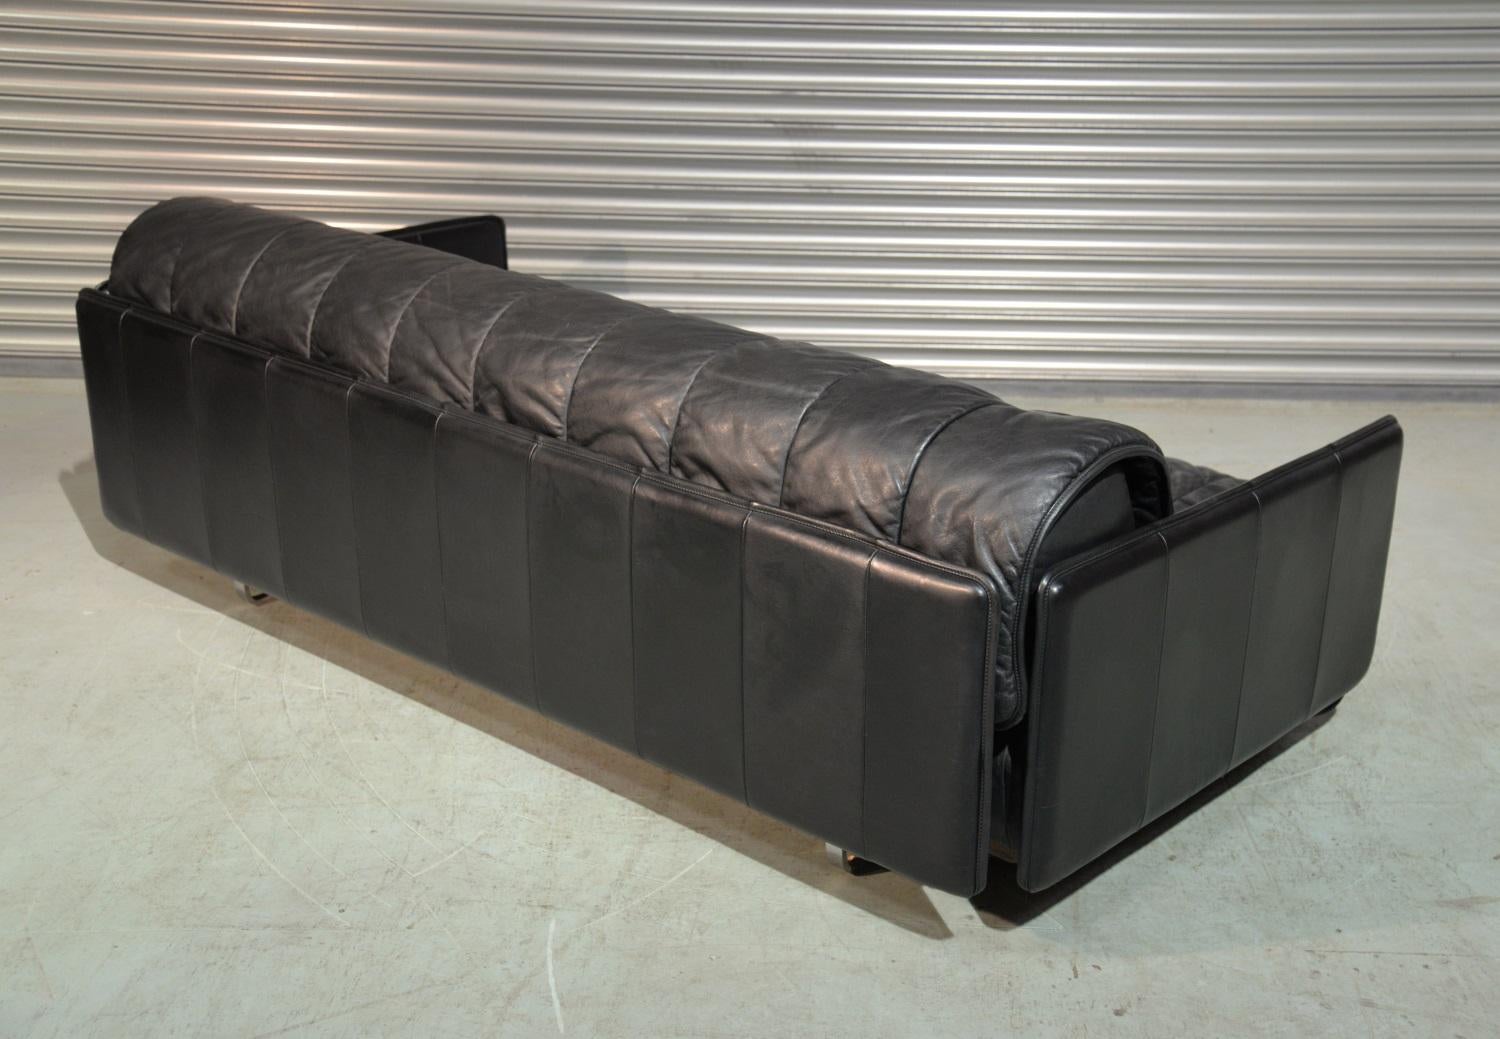 Late 20th Century Vintage Swiss De Sede Patchwork Leather Sofa / Daybed, 1970s For Sale